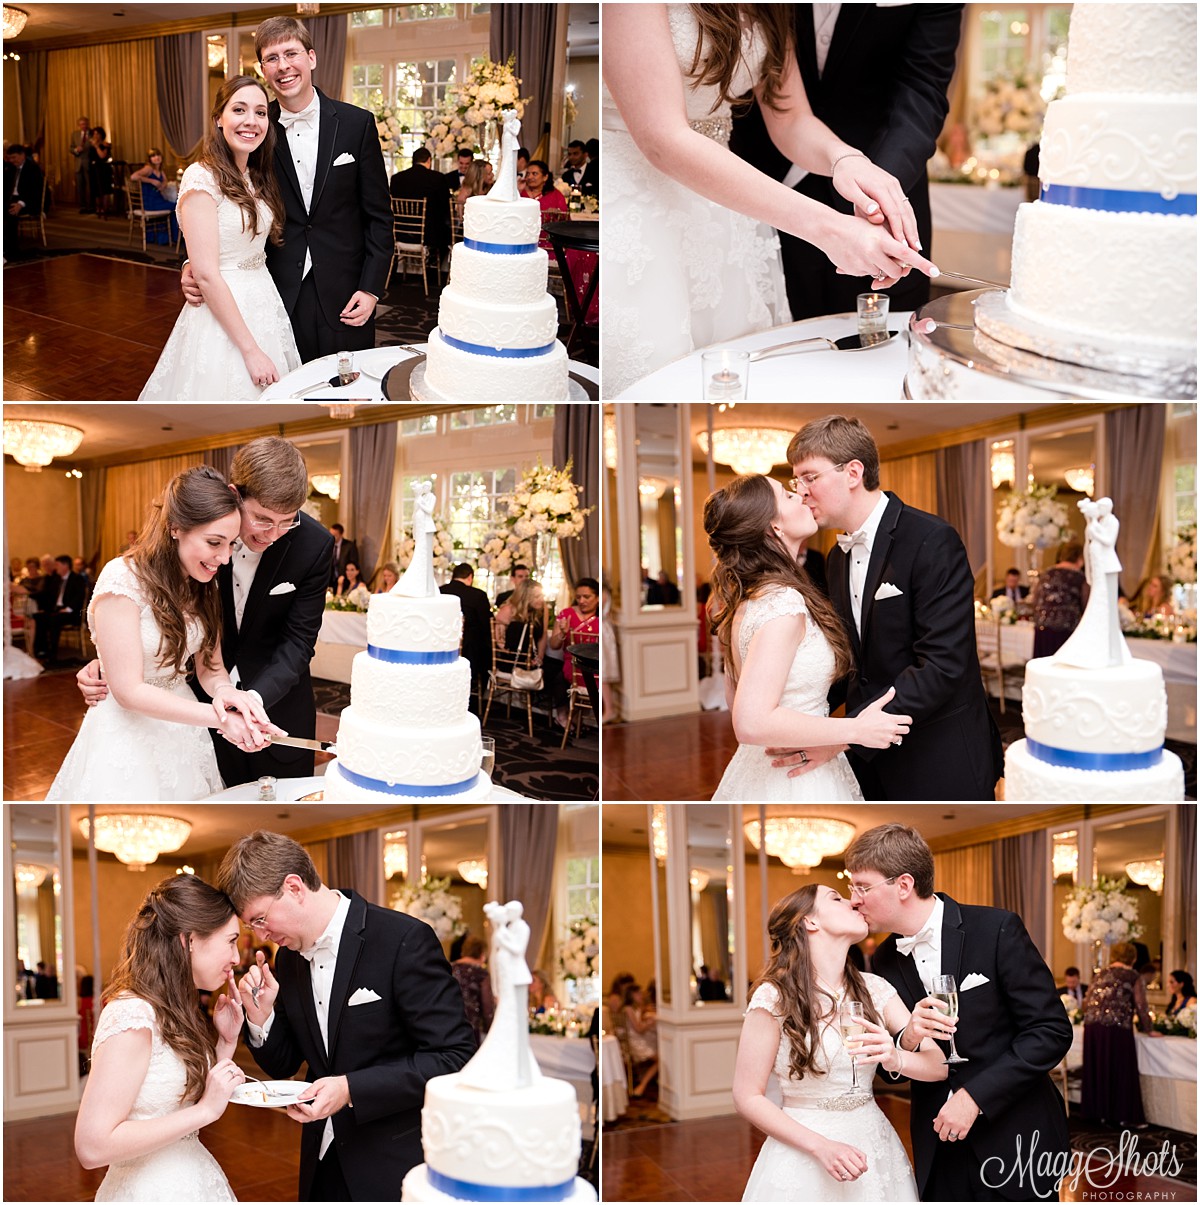 MaggShots Photography MaggShots Professional Photography Destination Photographer Cake Cutting His and Hers Love Kiss